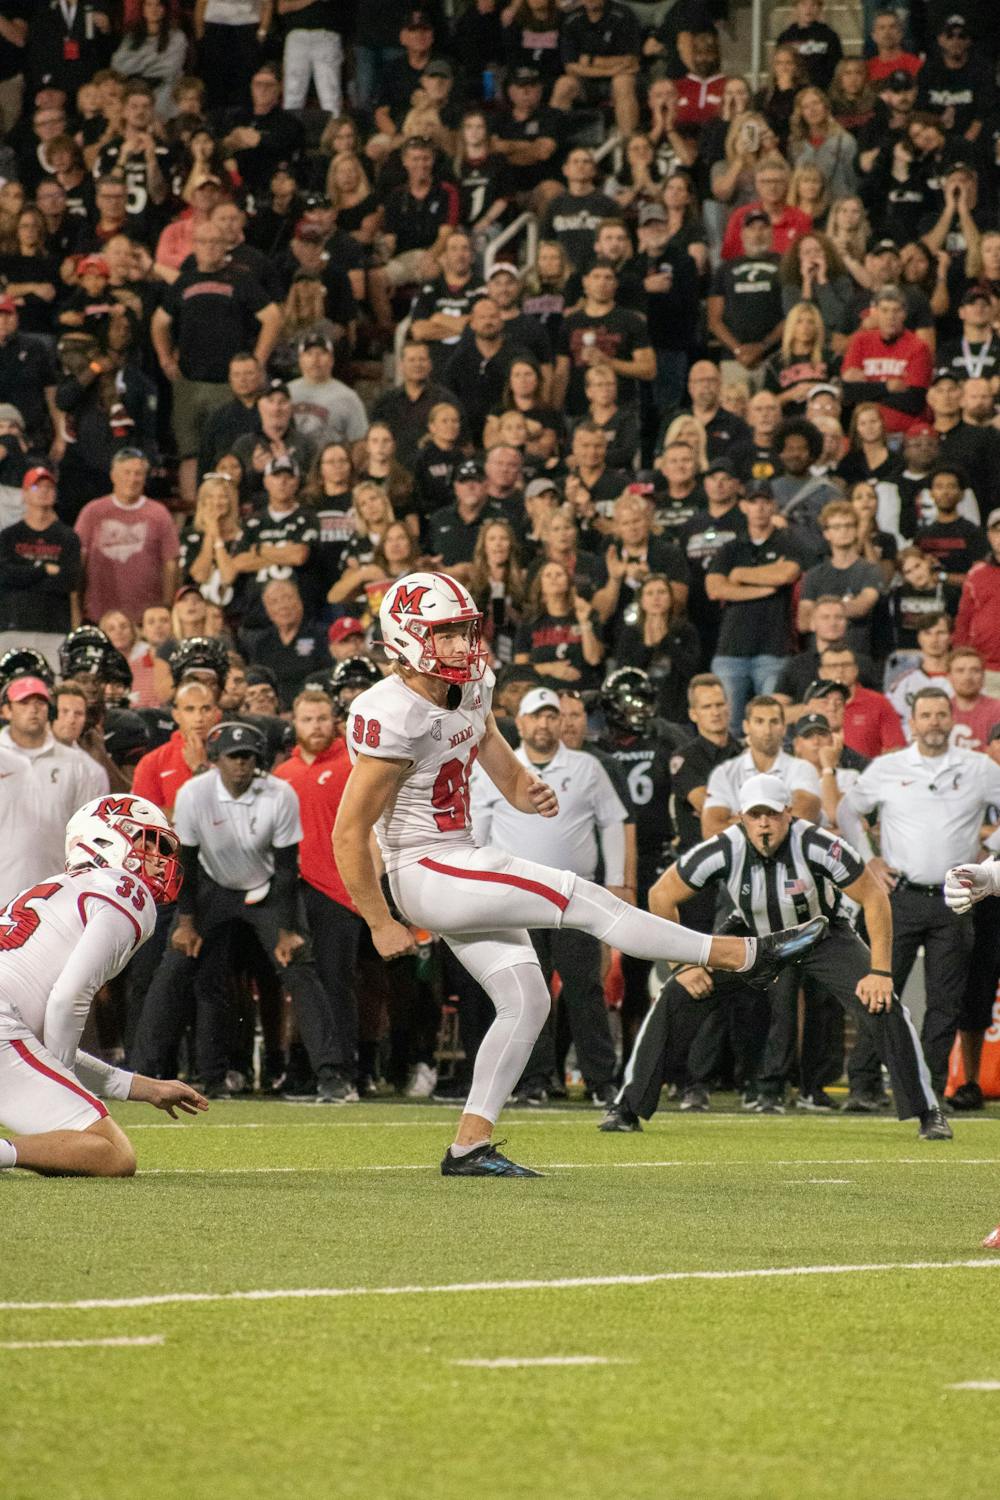 Graham Nicholson is one of ﻿three qualified FBS kickers who hasn&#x27;t missed a field goal this season. He has made 17 field goals, the other two have made 11 and nine respectively.